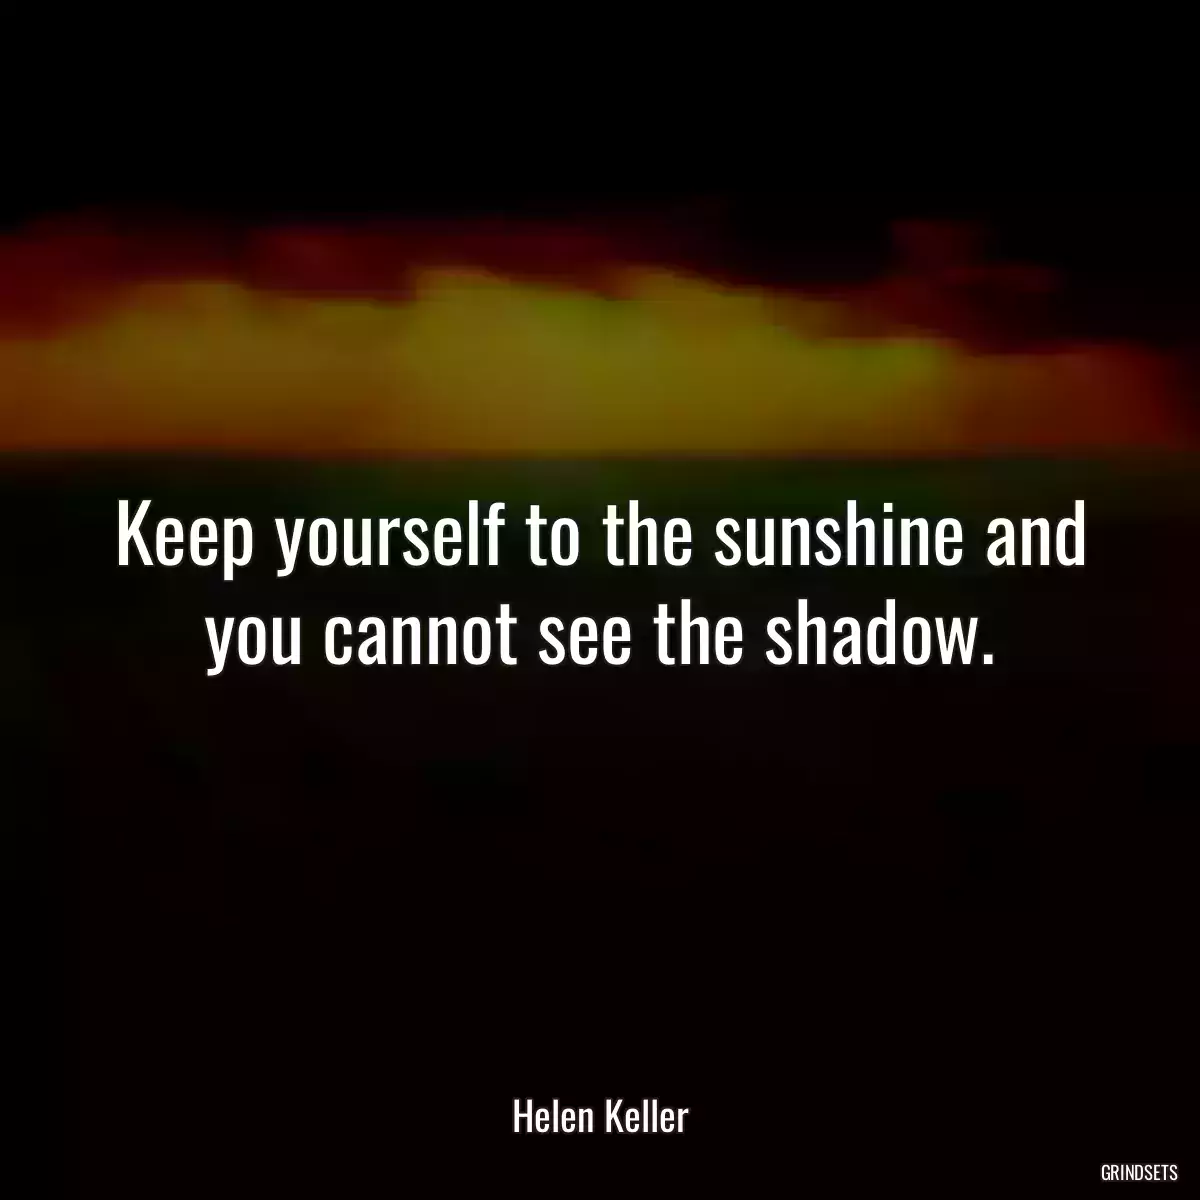 Keep yourself to the sunshine and you cannot see the shadow.